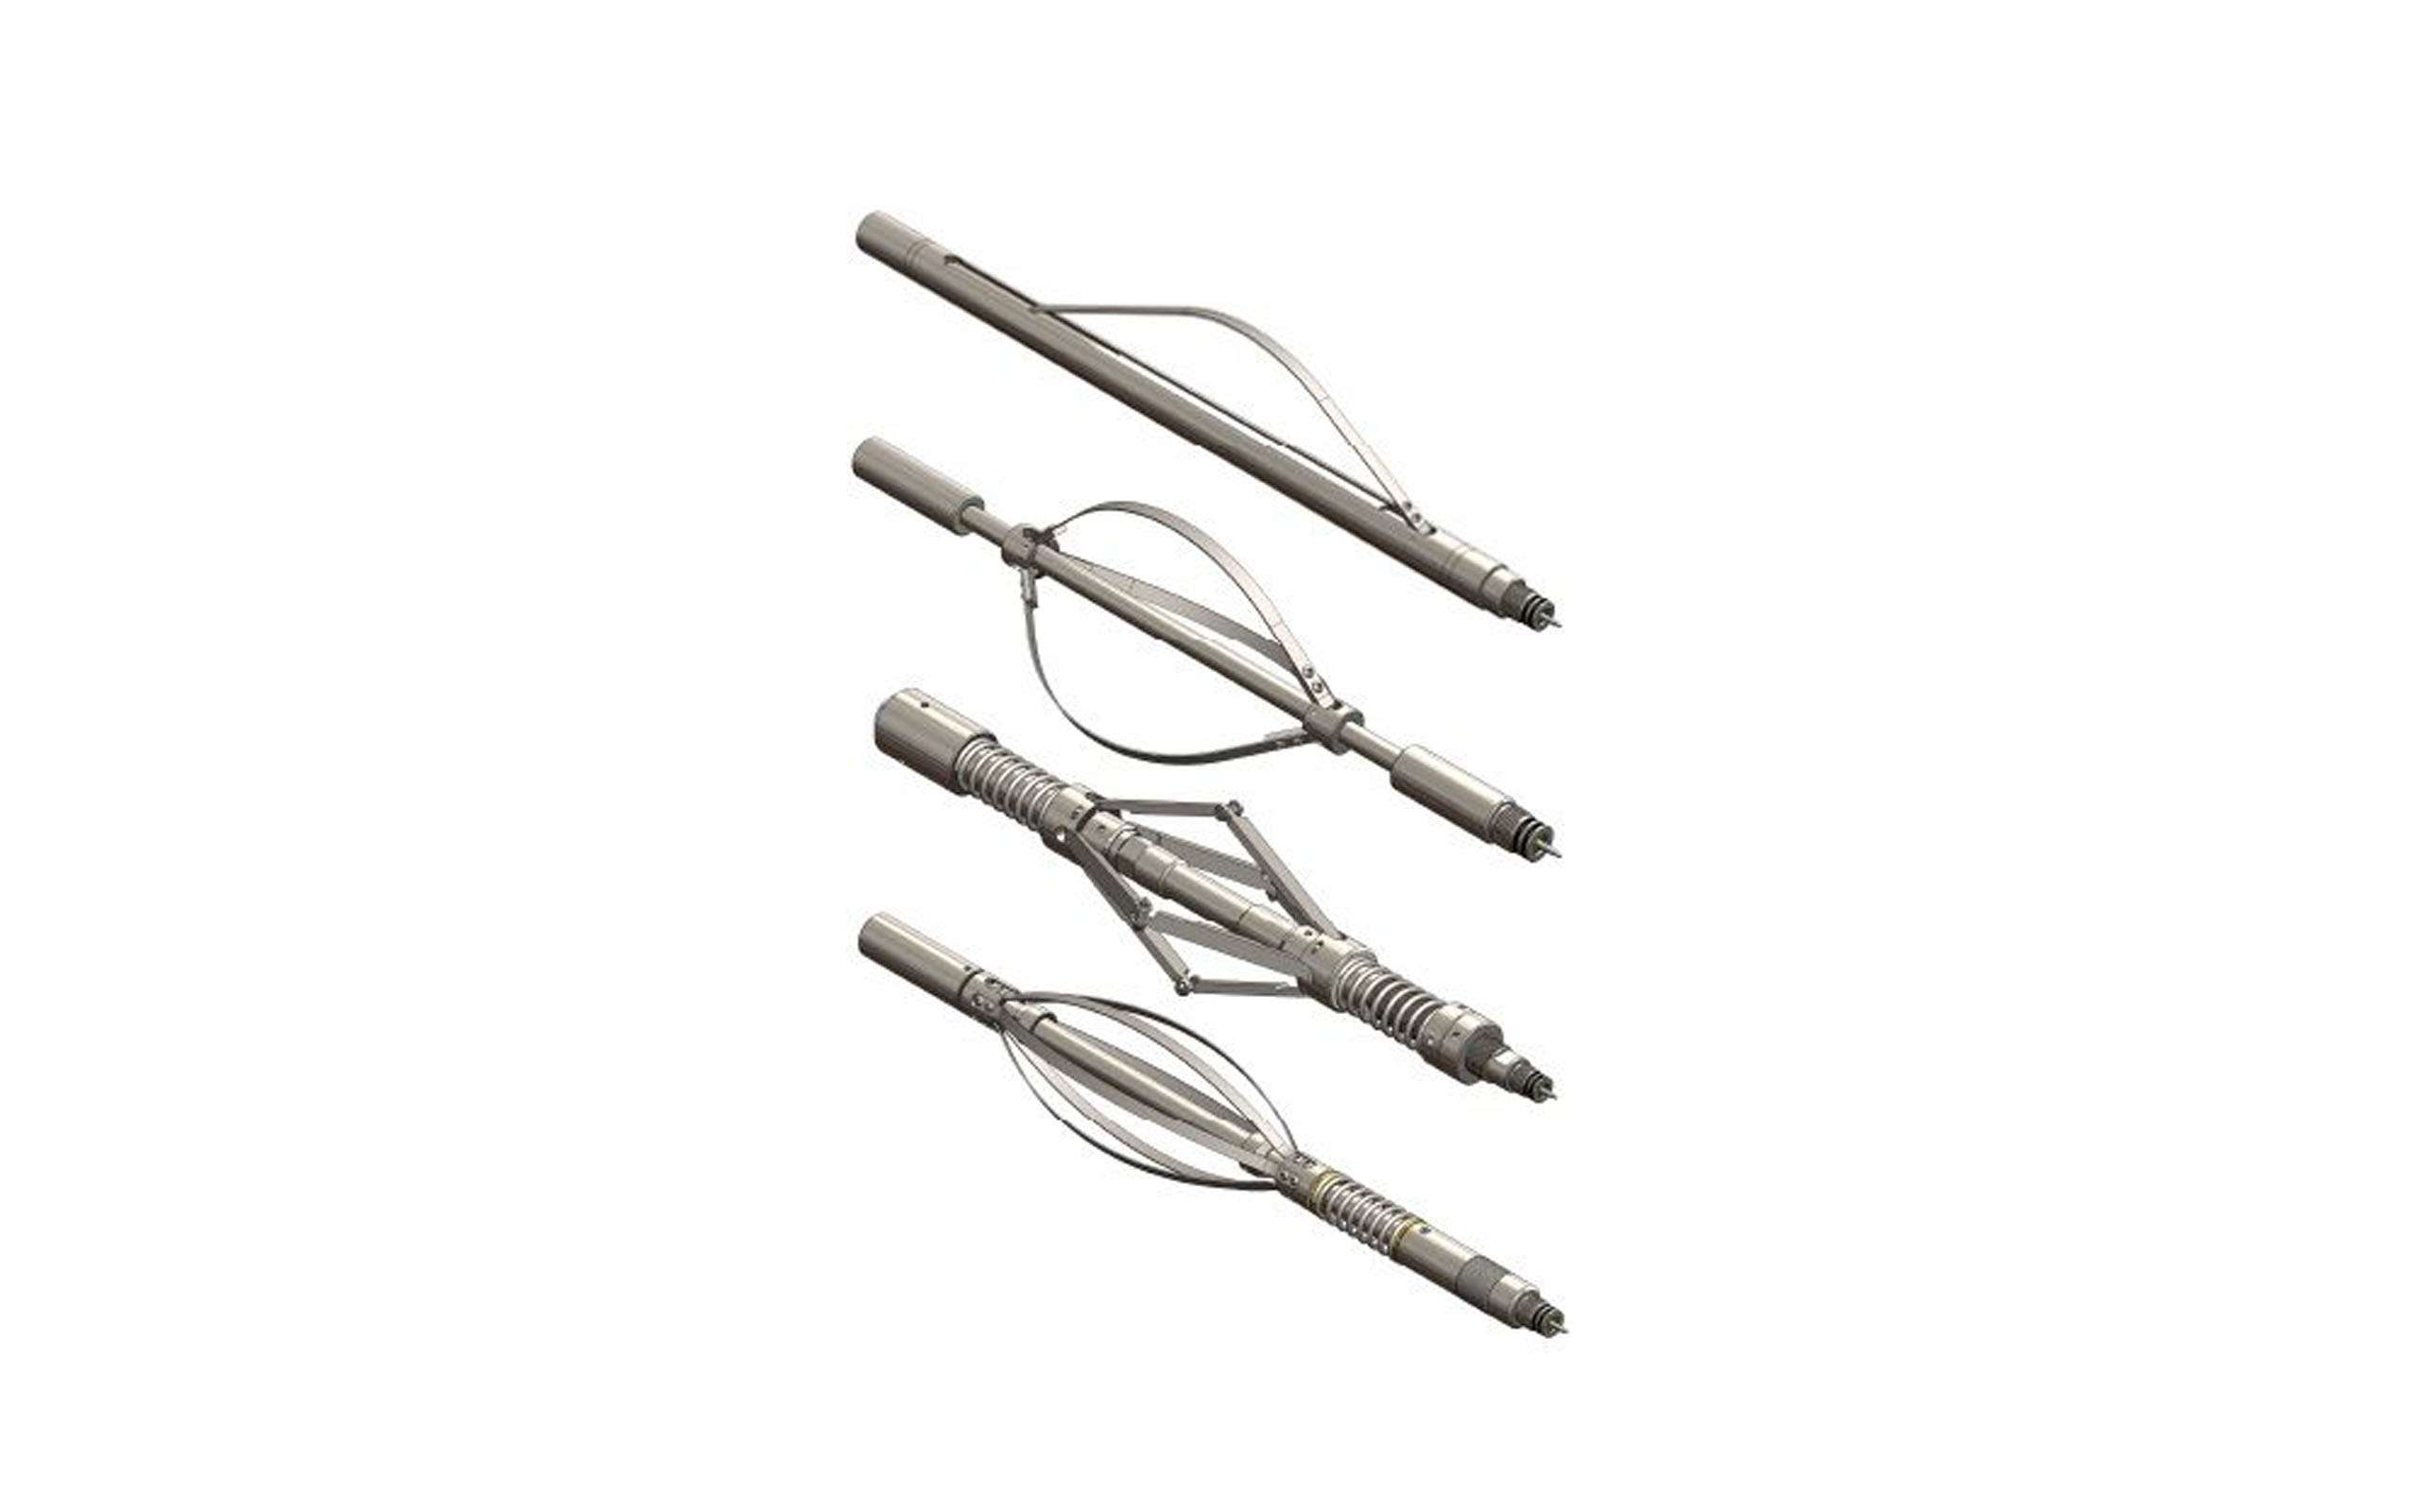 Renderings of four different types of metal tubes with various attachments